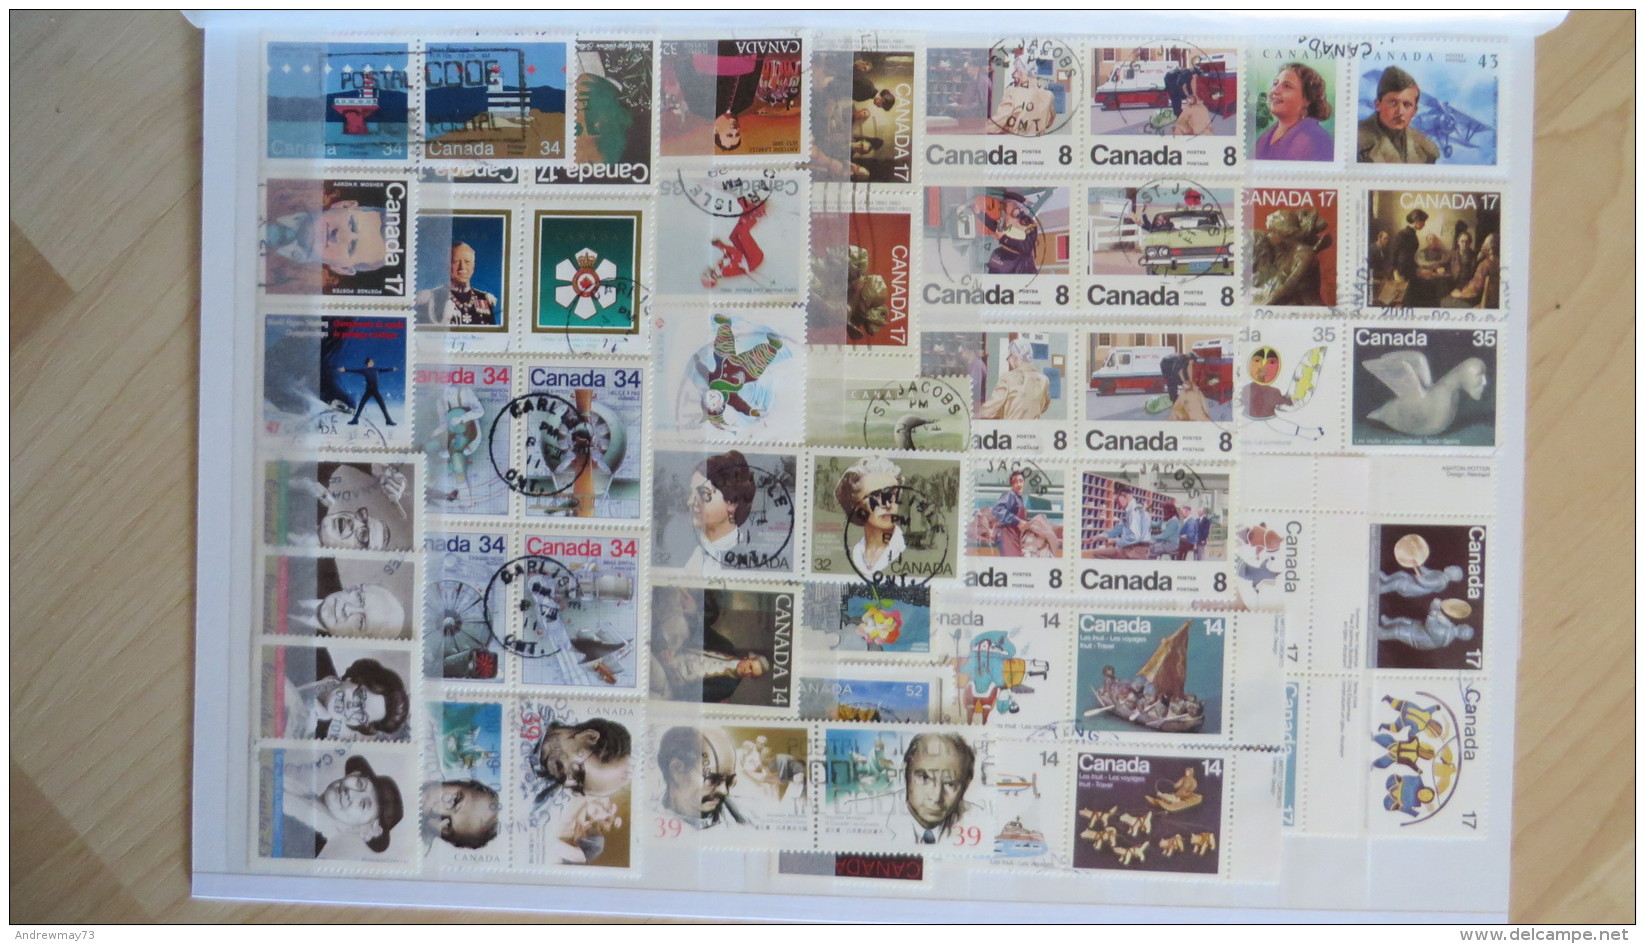 AMAZING CANADA COLLECTION: 0VER 2000 DIFFERENT